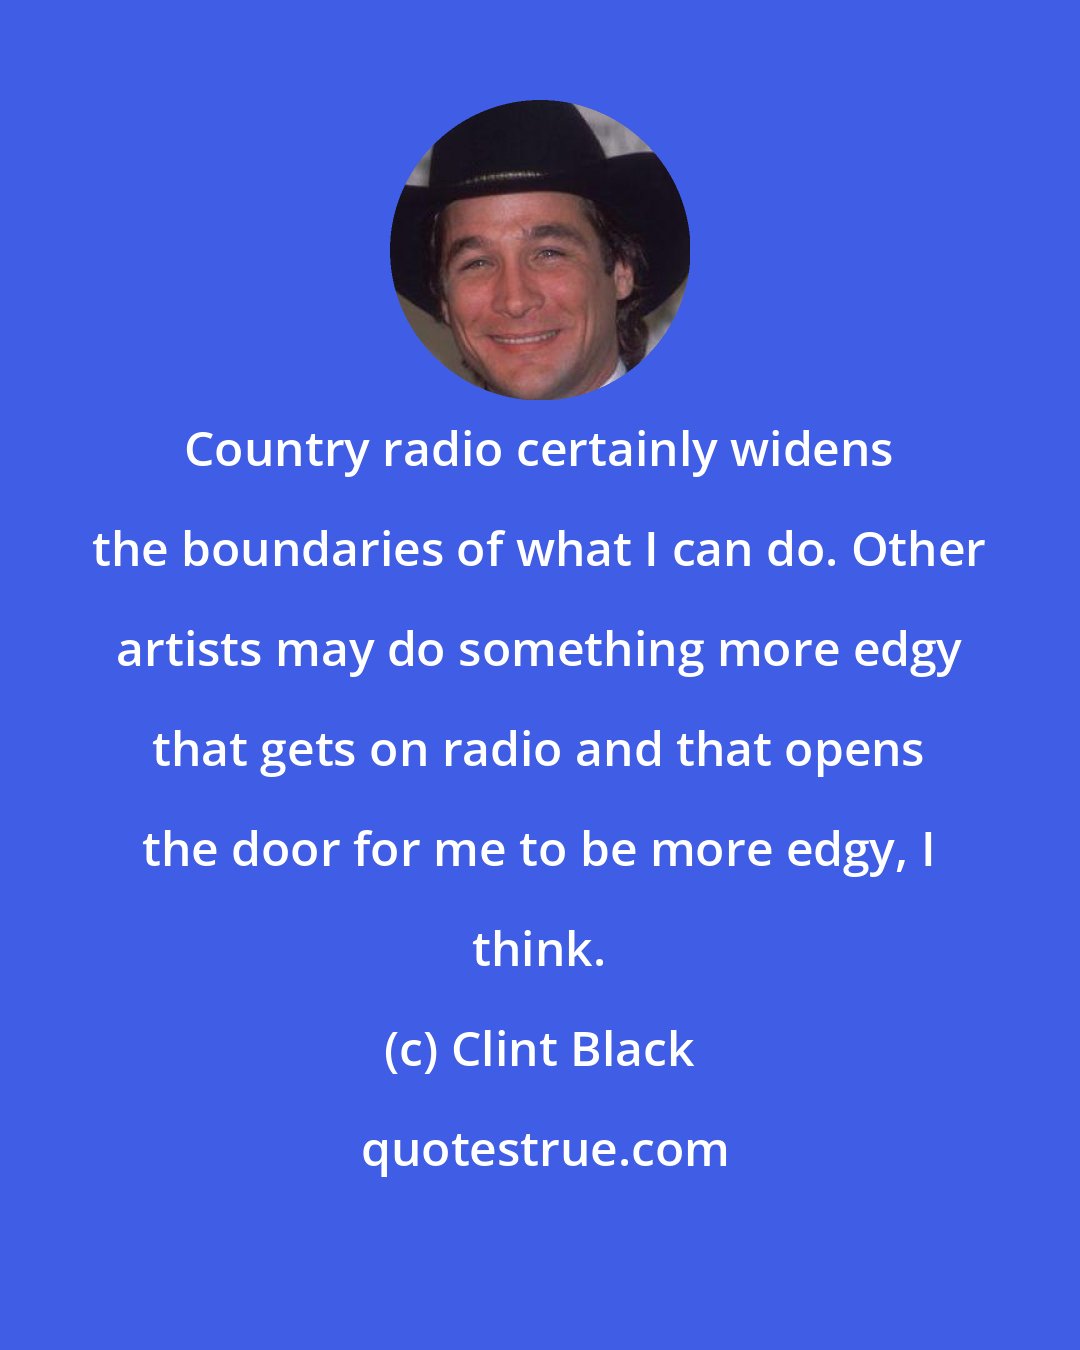 Clint Black: Country radio certainly widens the boundaries of what I can do. Other artists may do something more edgy that gets on radio and that opens the door for me to be more edgy, I think.